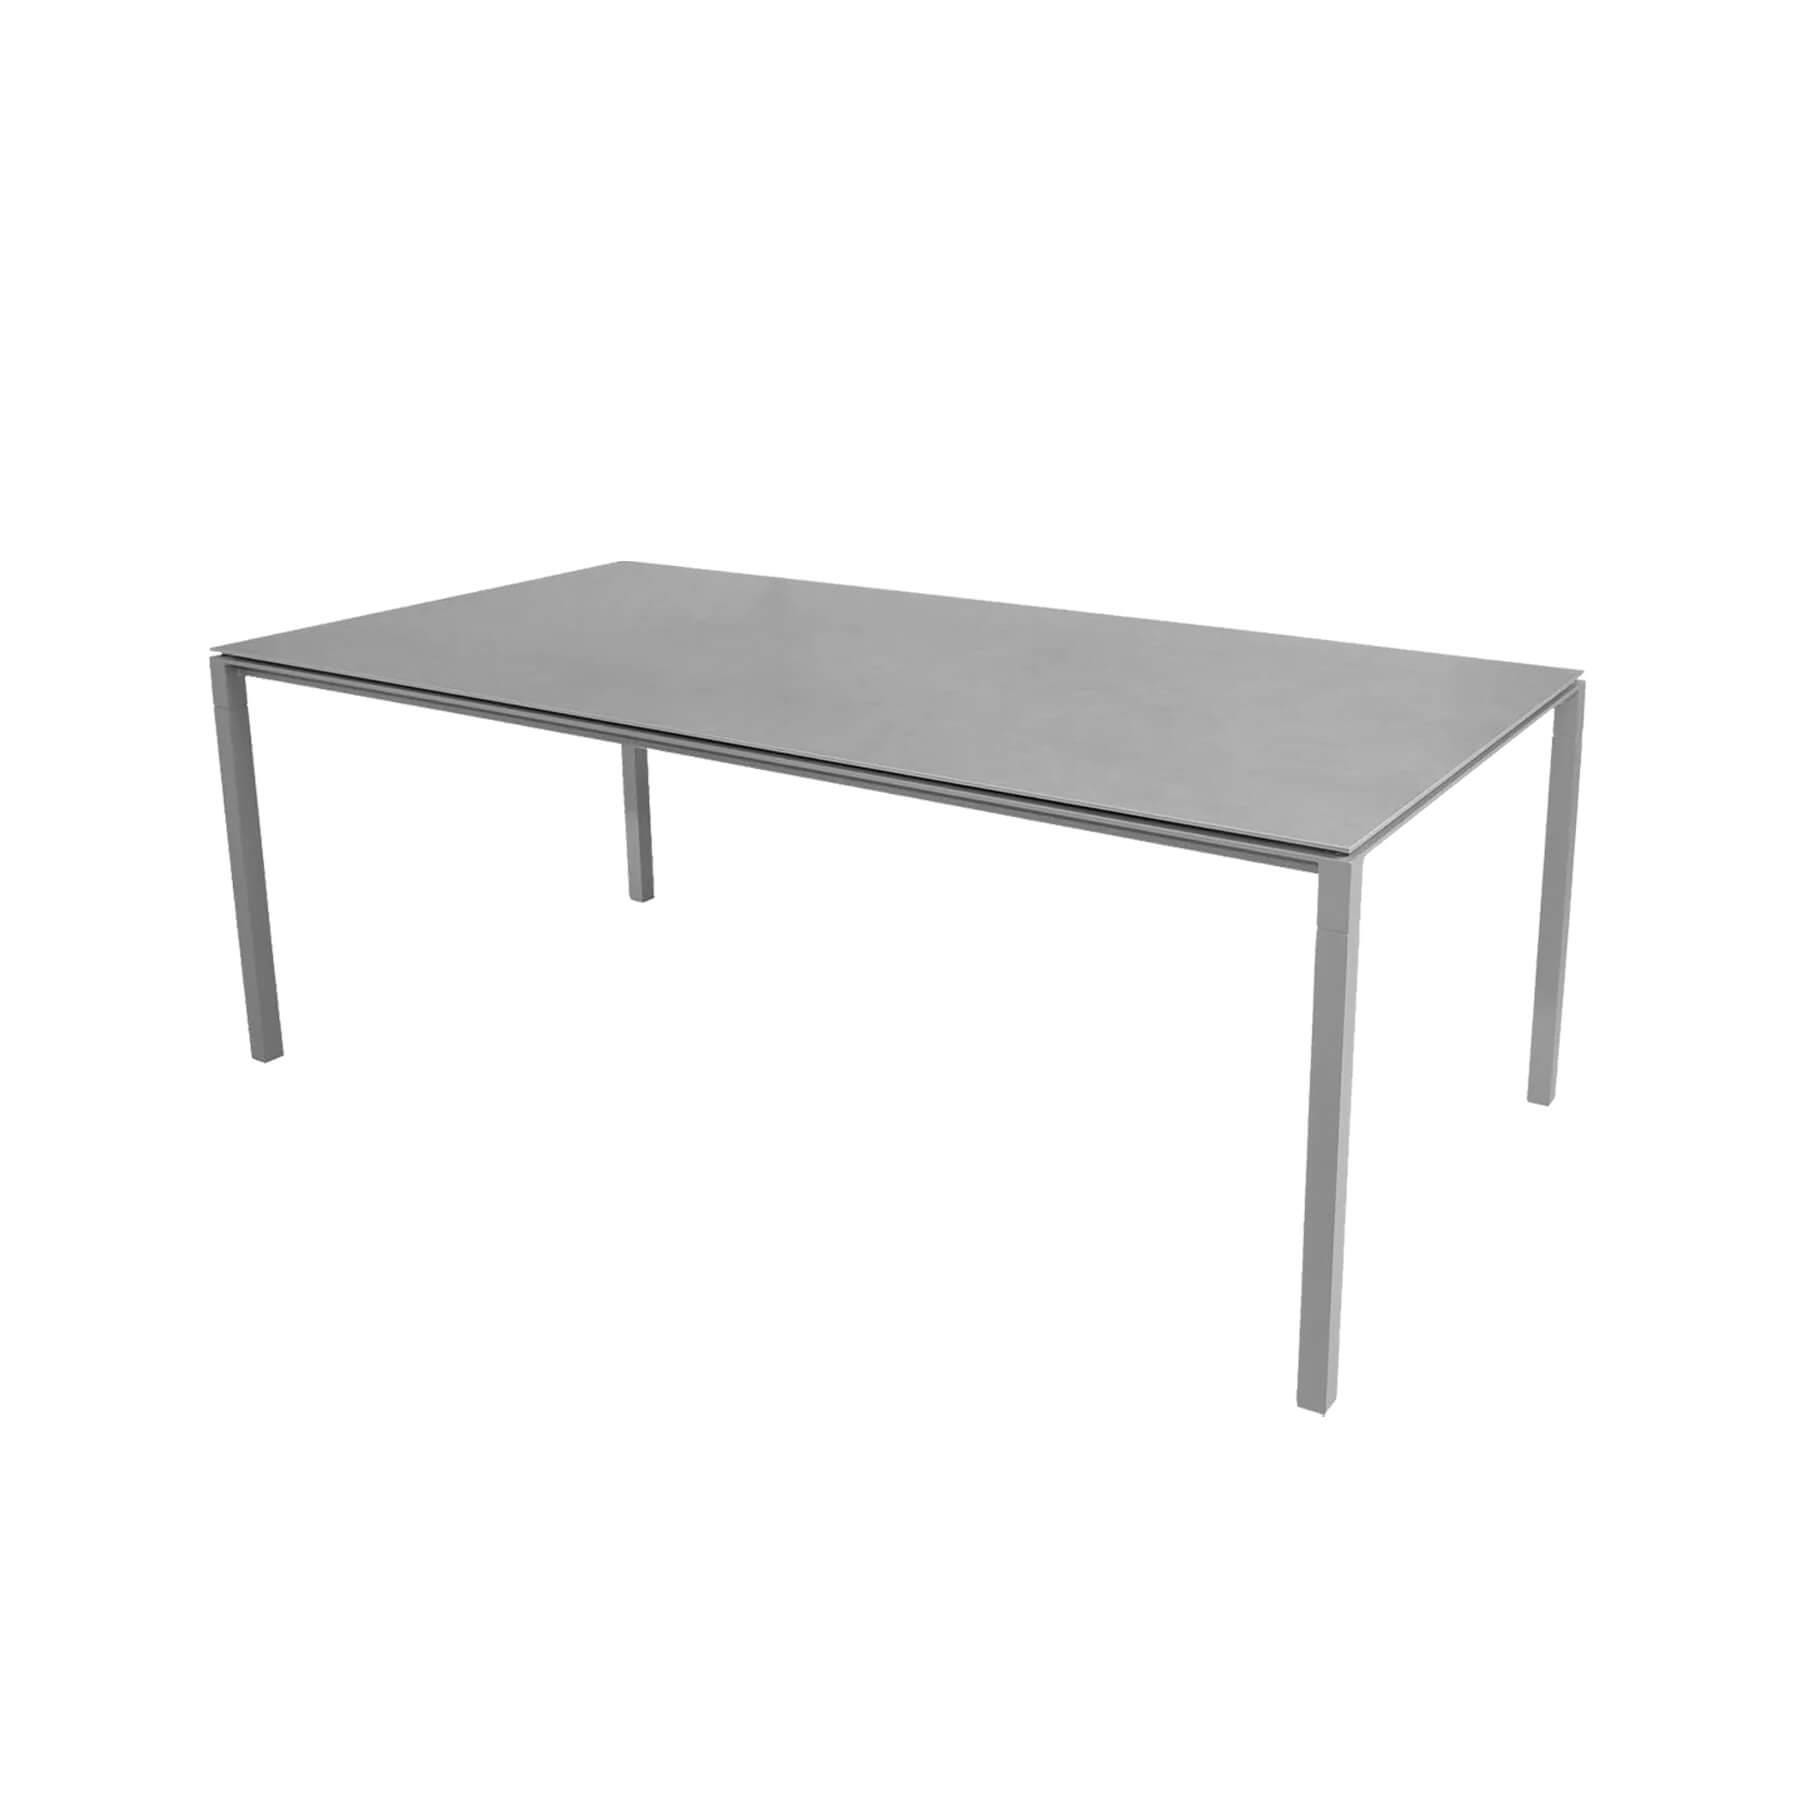 Caneline Pure Outdoor Dining Table Large Ceramic Concrete Grey Top Light Grey Legs